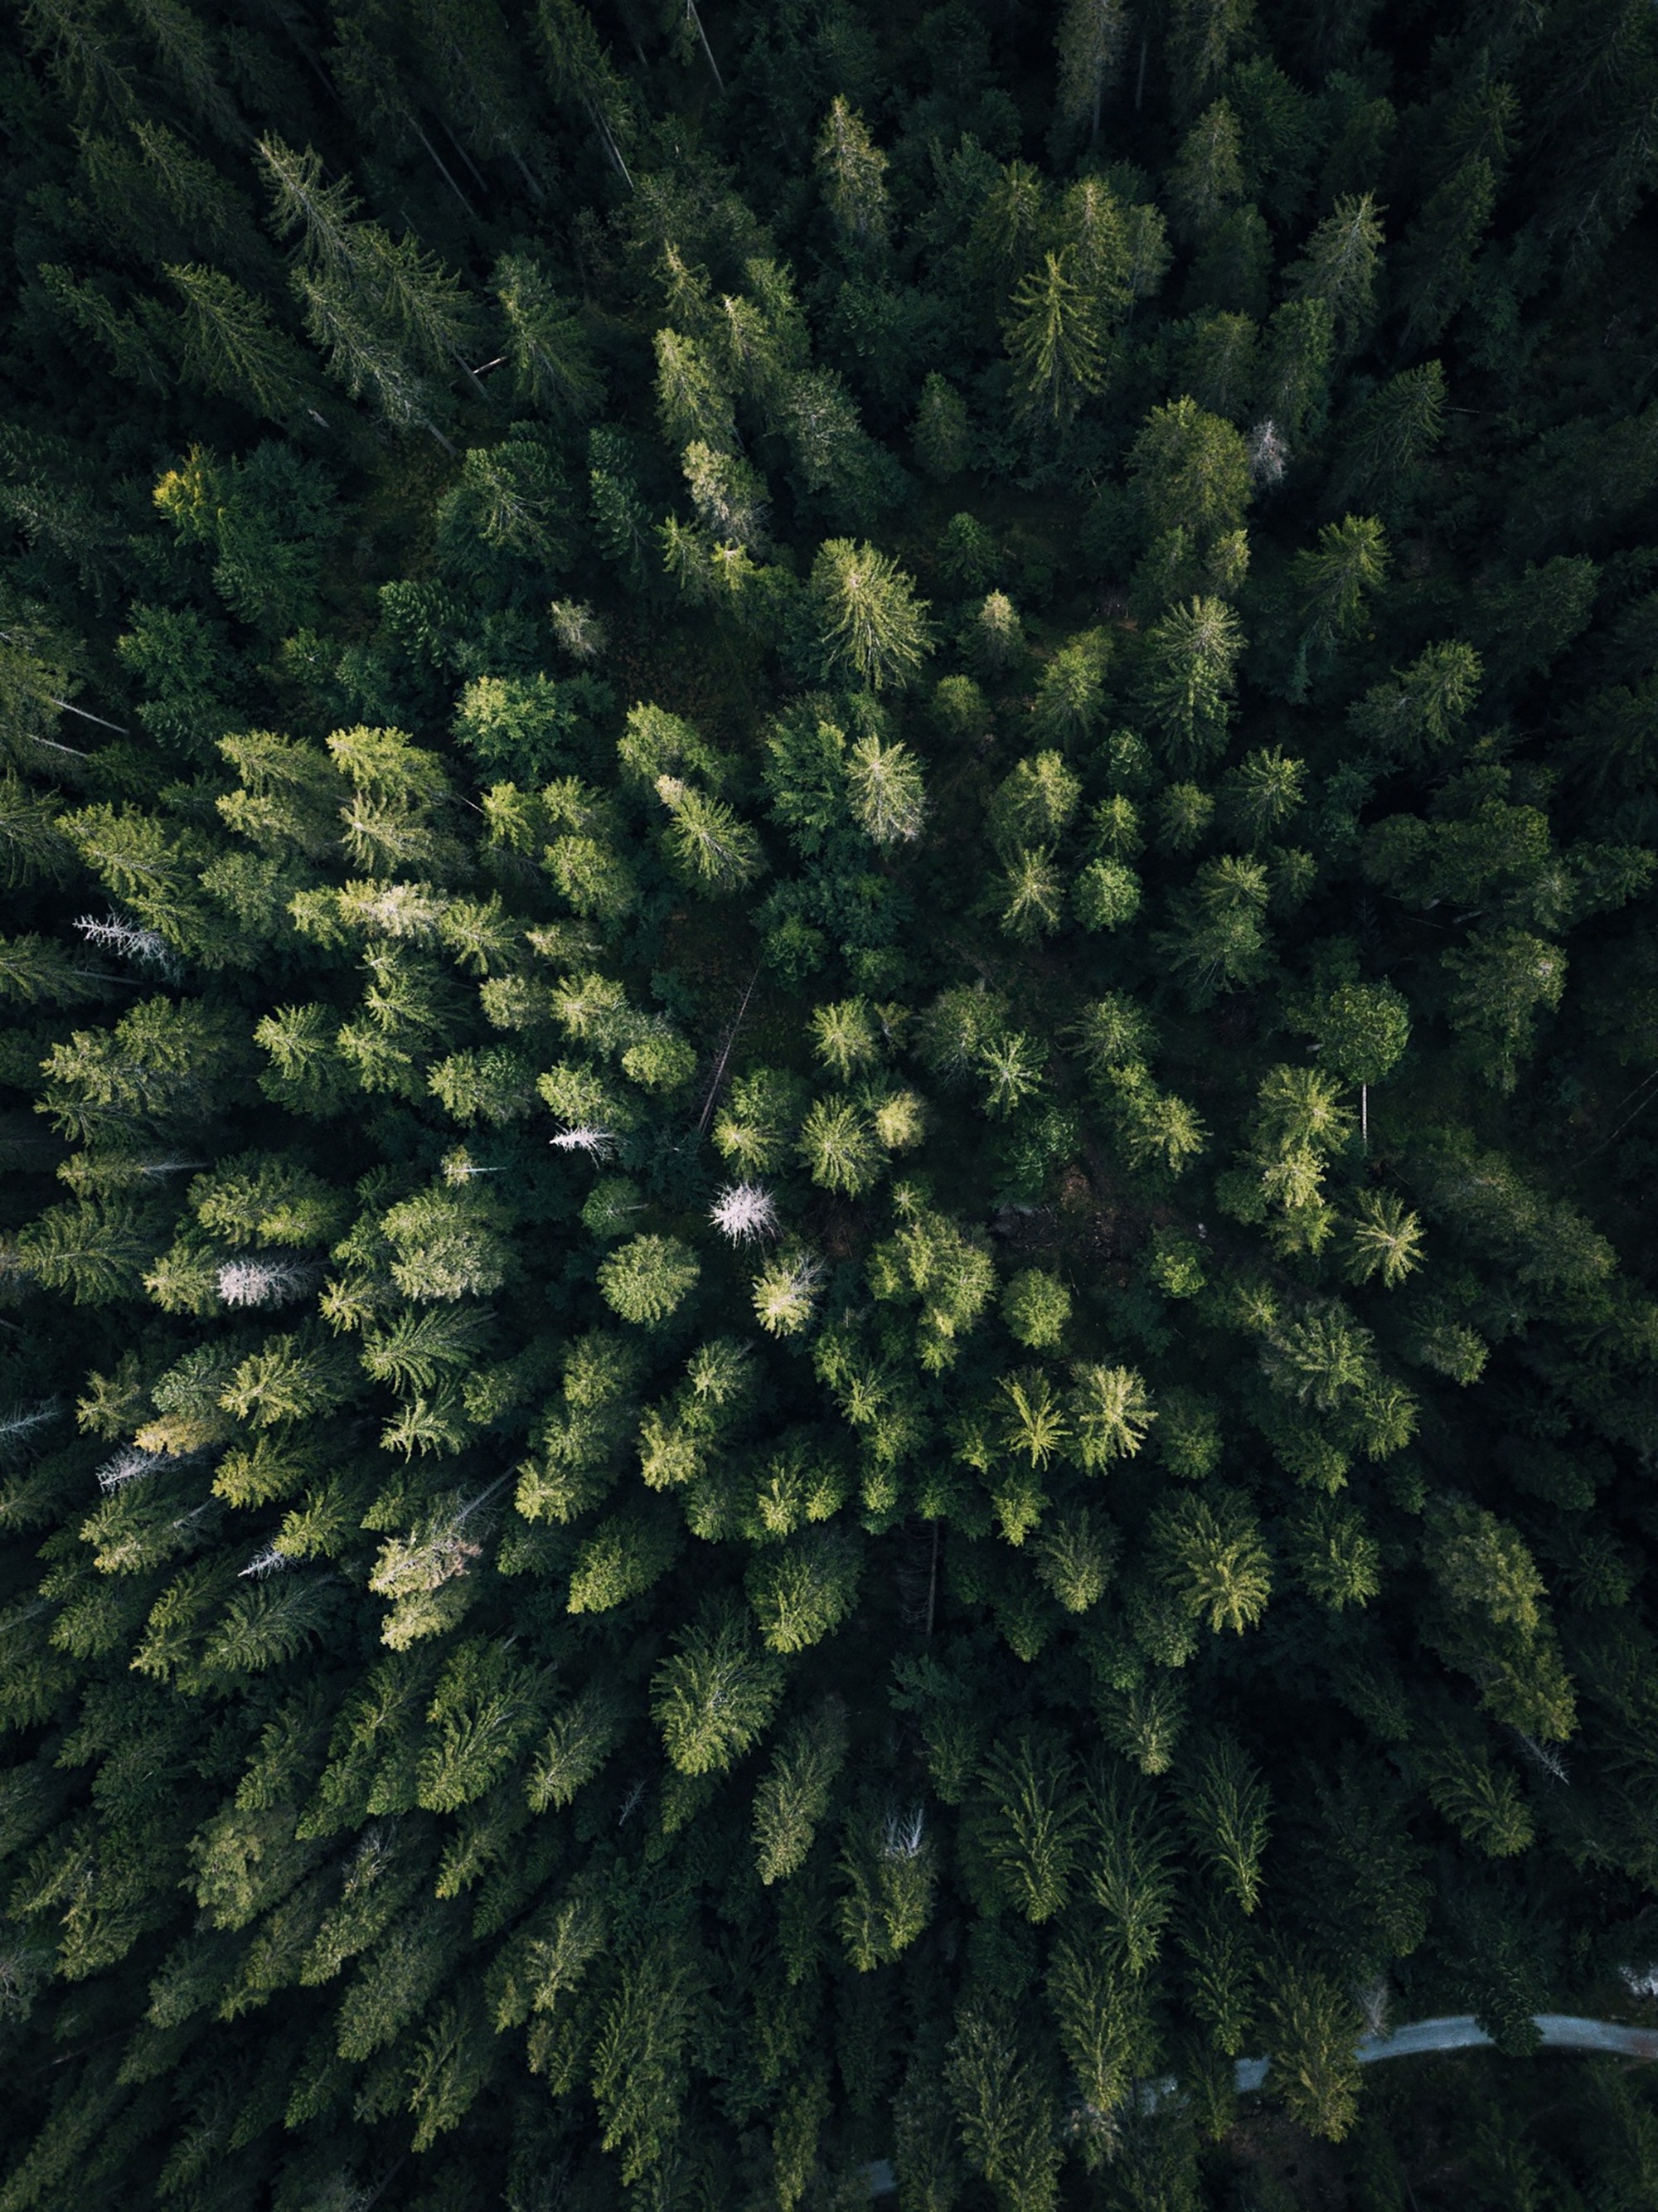 HD wallpaper view from above, nature, trees, green, forest, overview, review